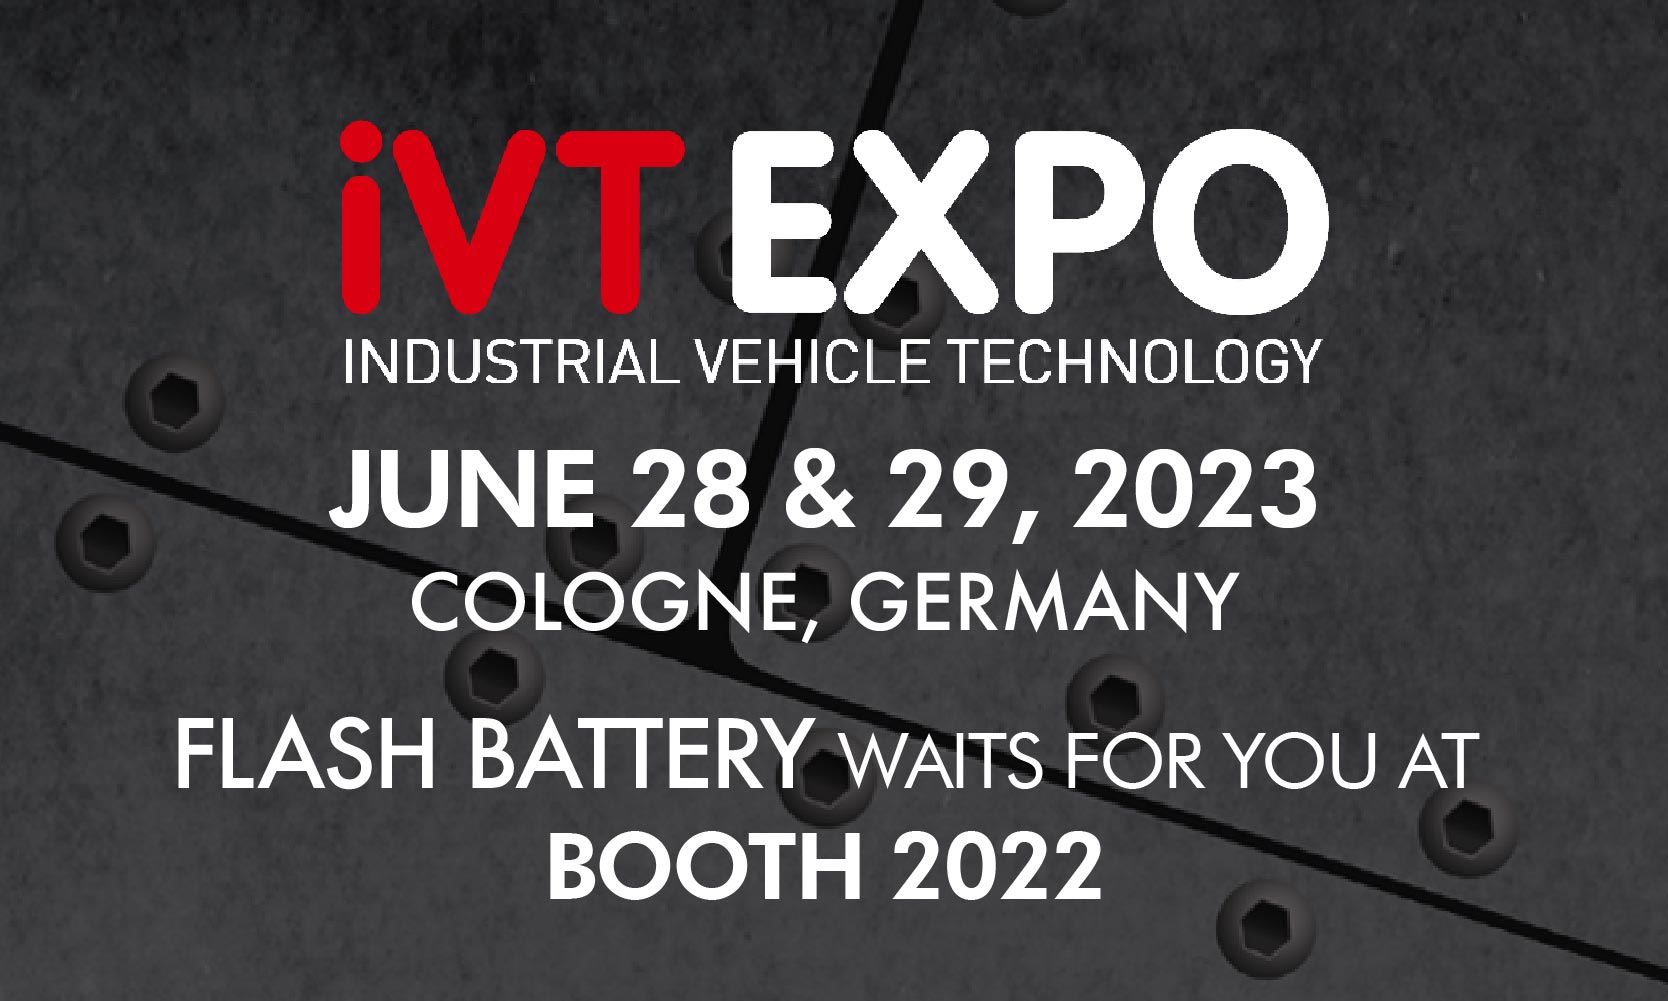 Flash Battery exhibitor at IVT expo 